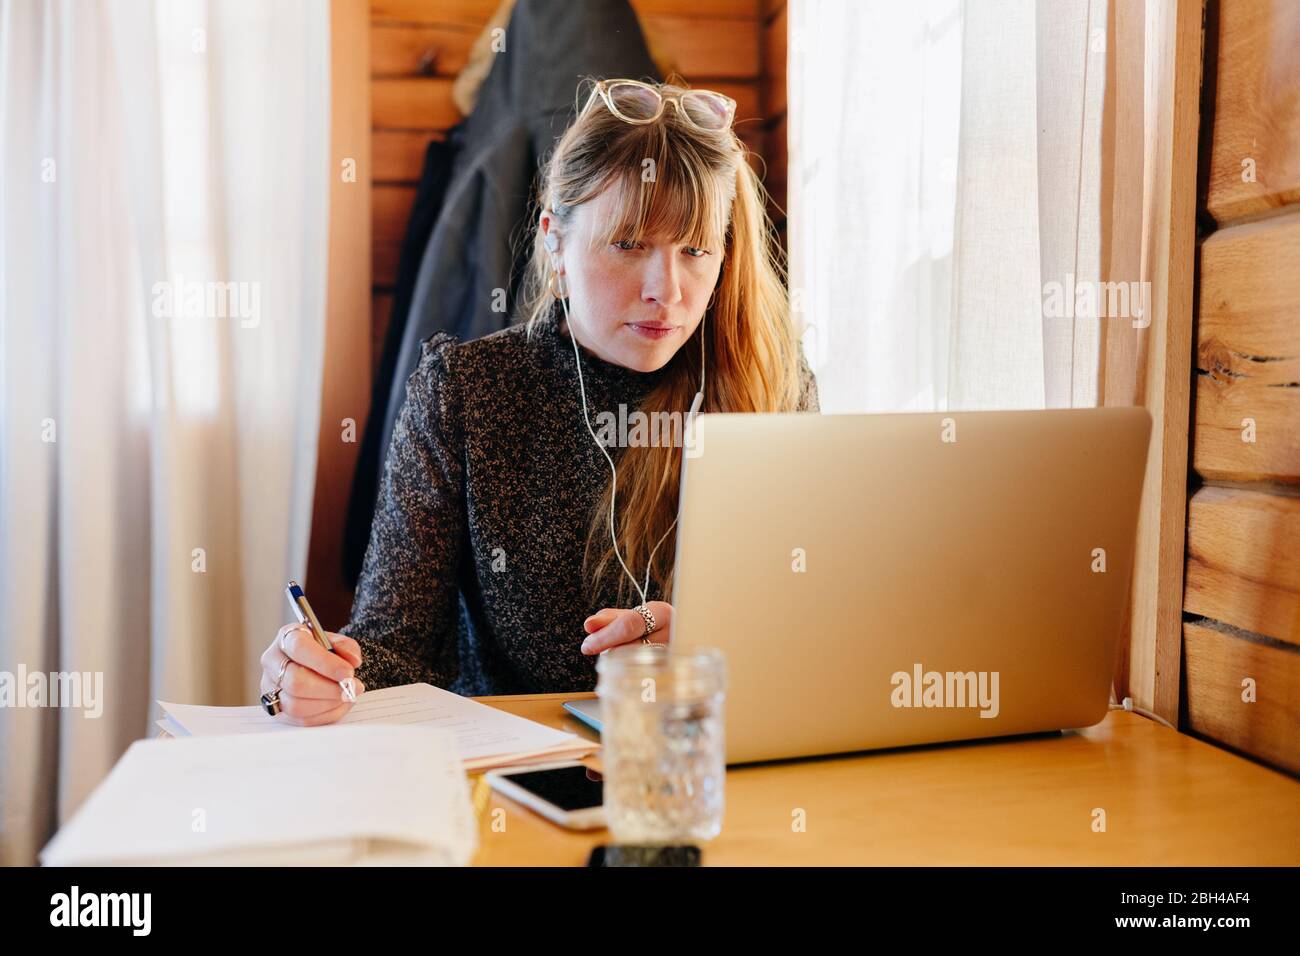 Businesswoman working on laptop computer taking notes and running her business from home during the covid-19 stay at home order.  Covid-19 pandemic Stock Photo